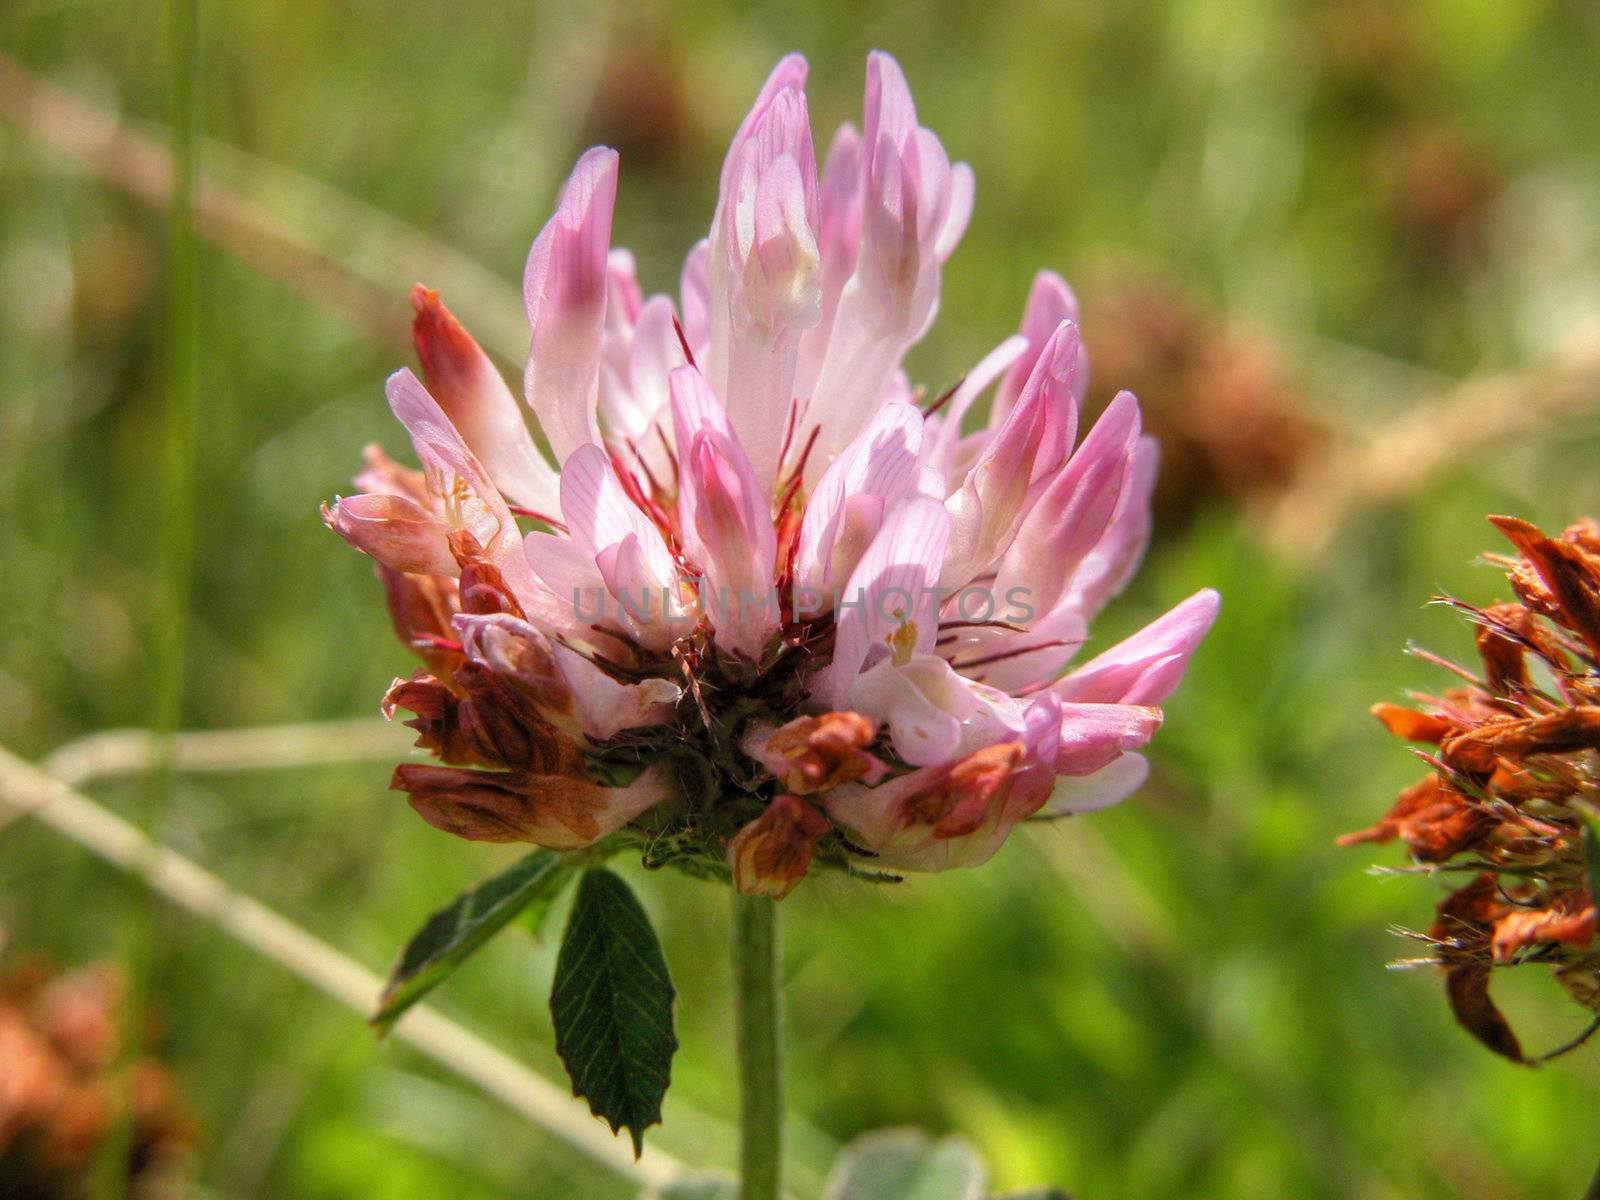 A typical flower of the Dolomites, Italy